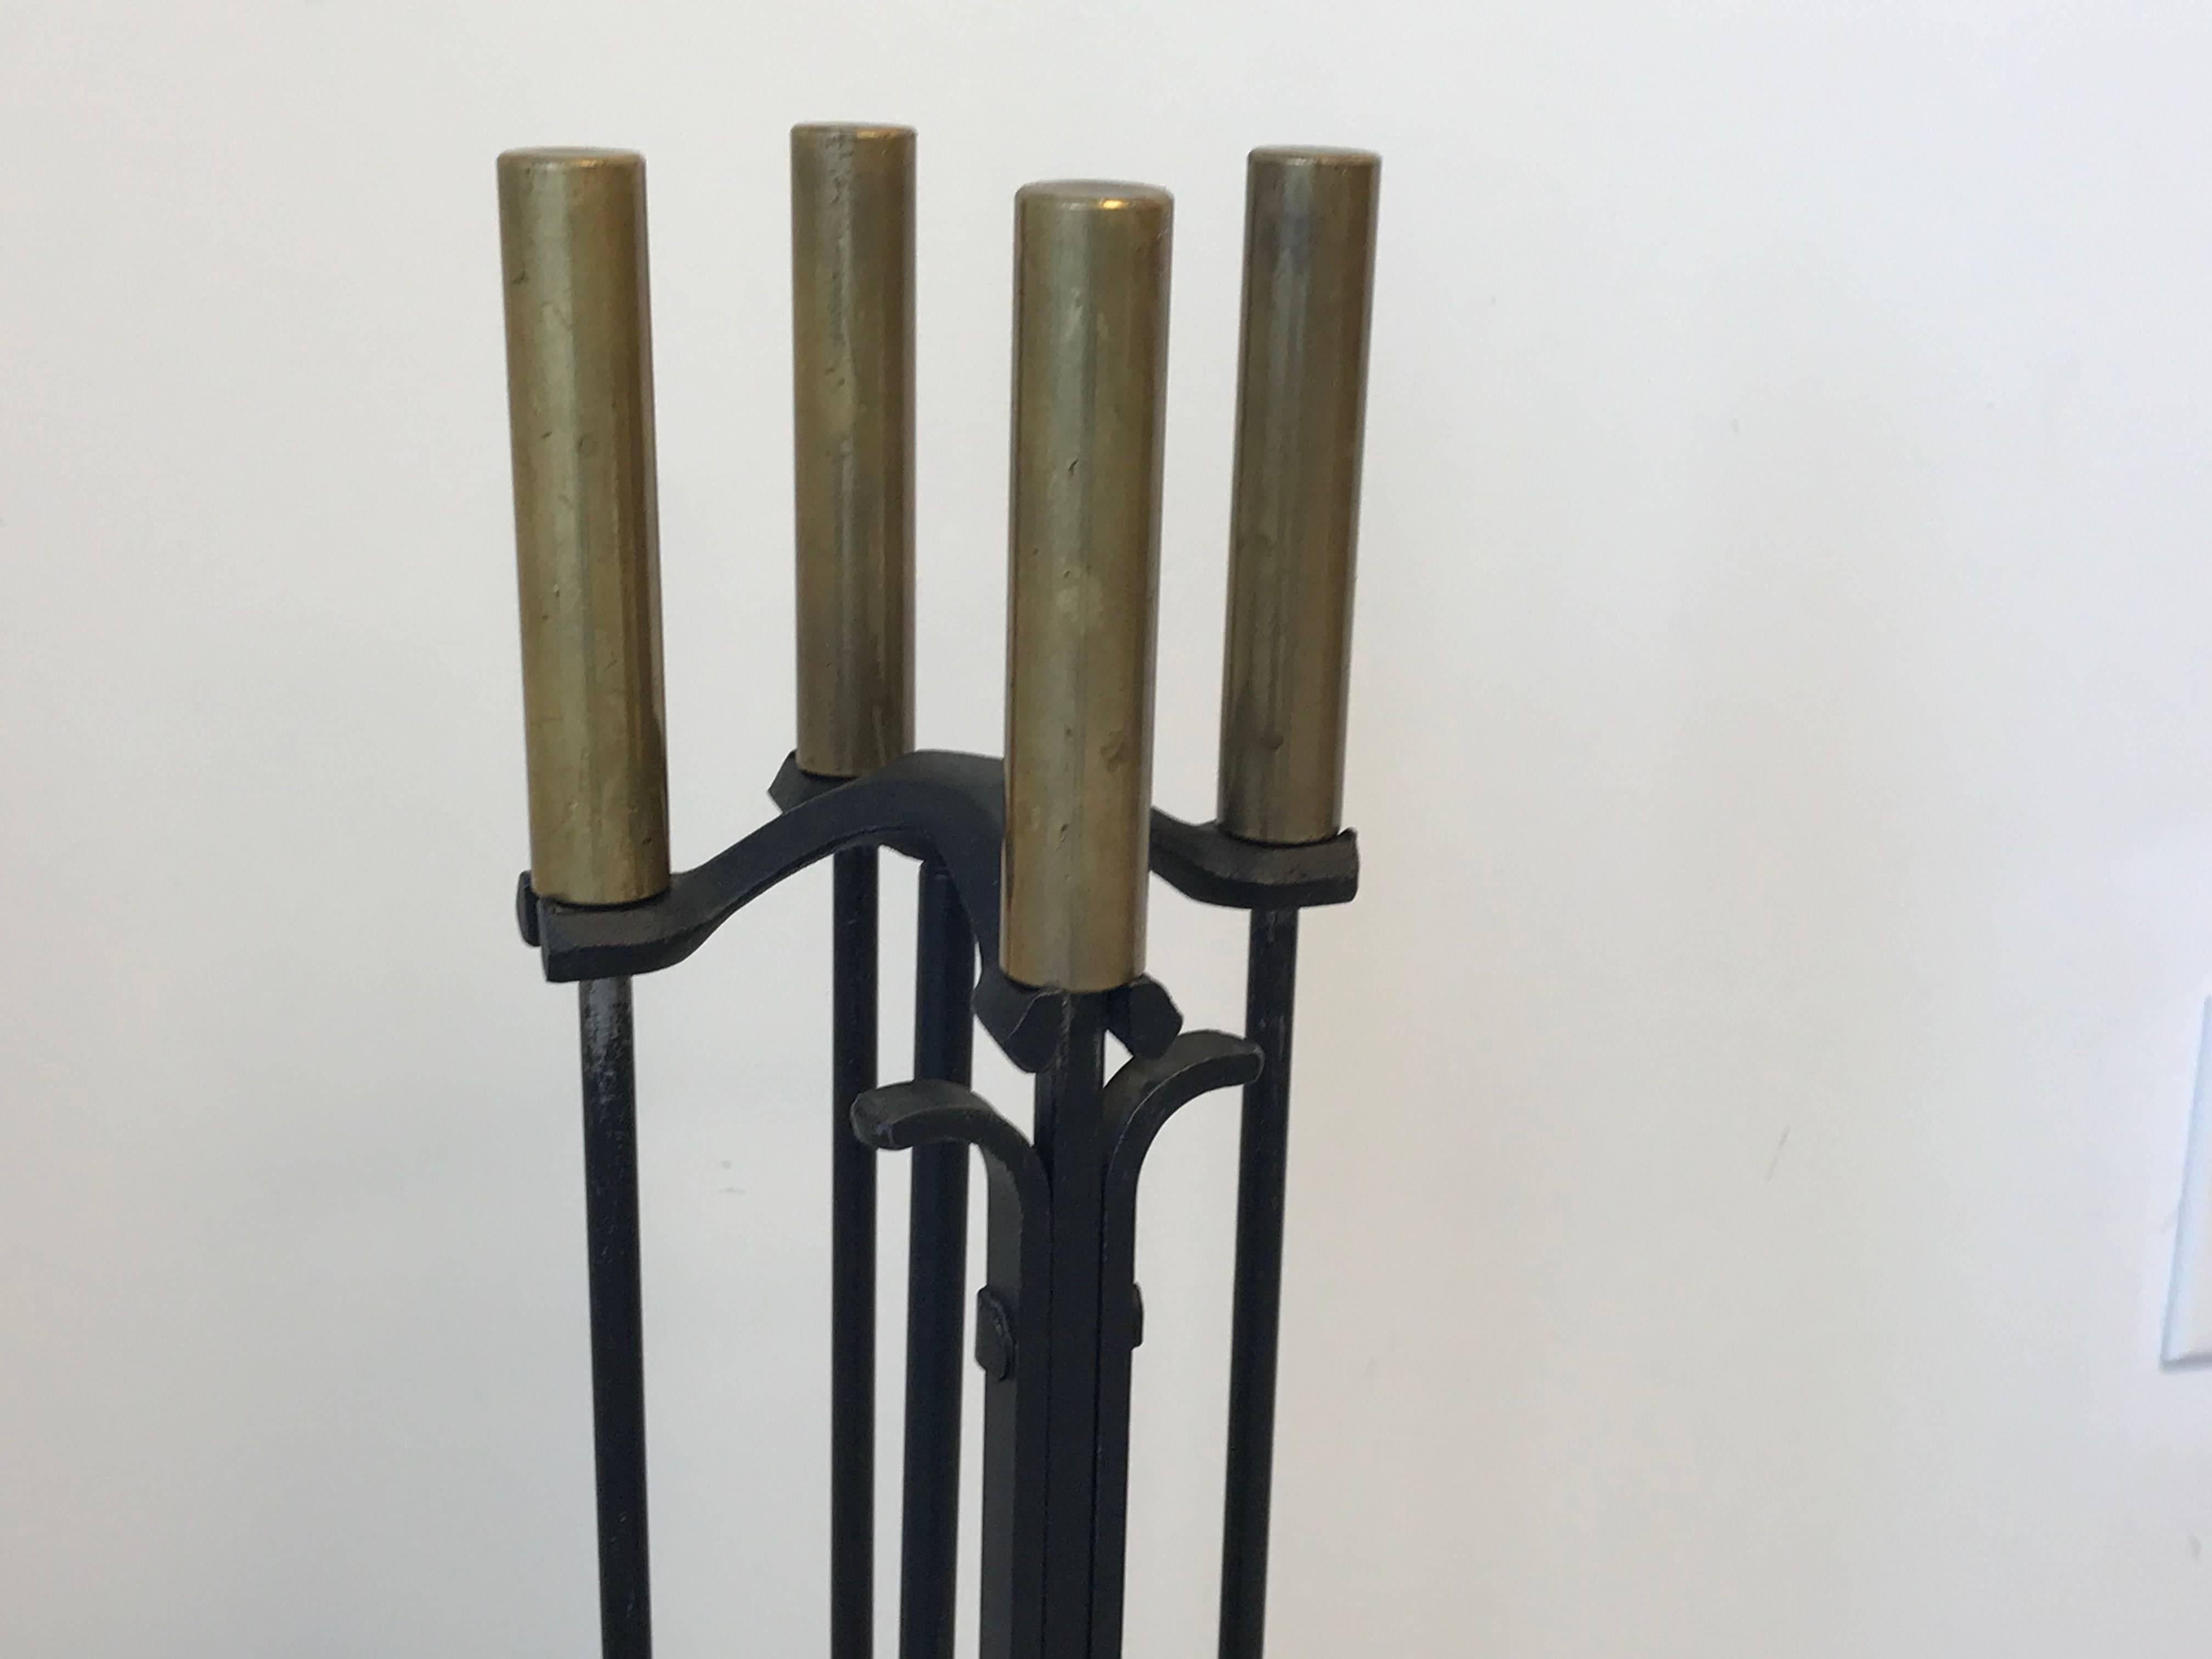 Offered is a gorgeous, 1970s modern Pilgrim iron fireplace tool set with cylindrical brass handles. Set of five; includes brush, poker, tongs, shovel, and stand.